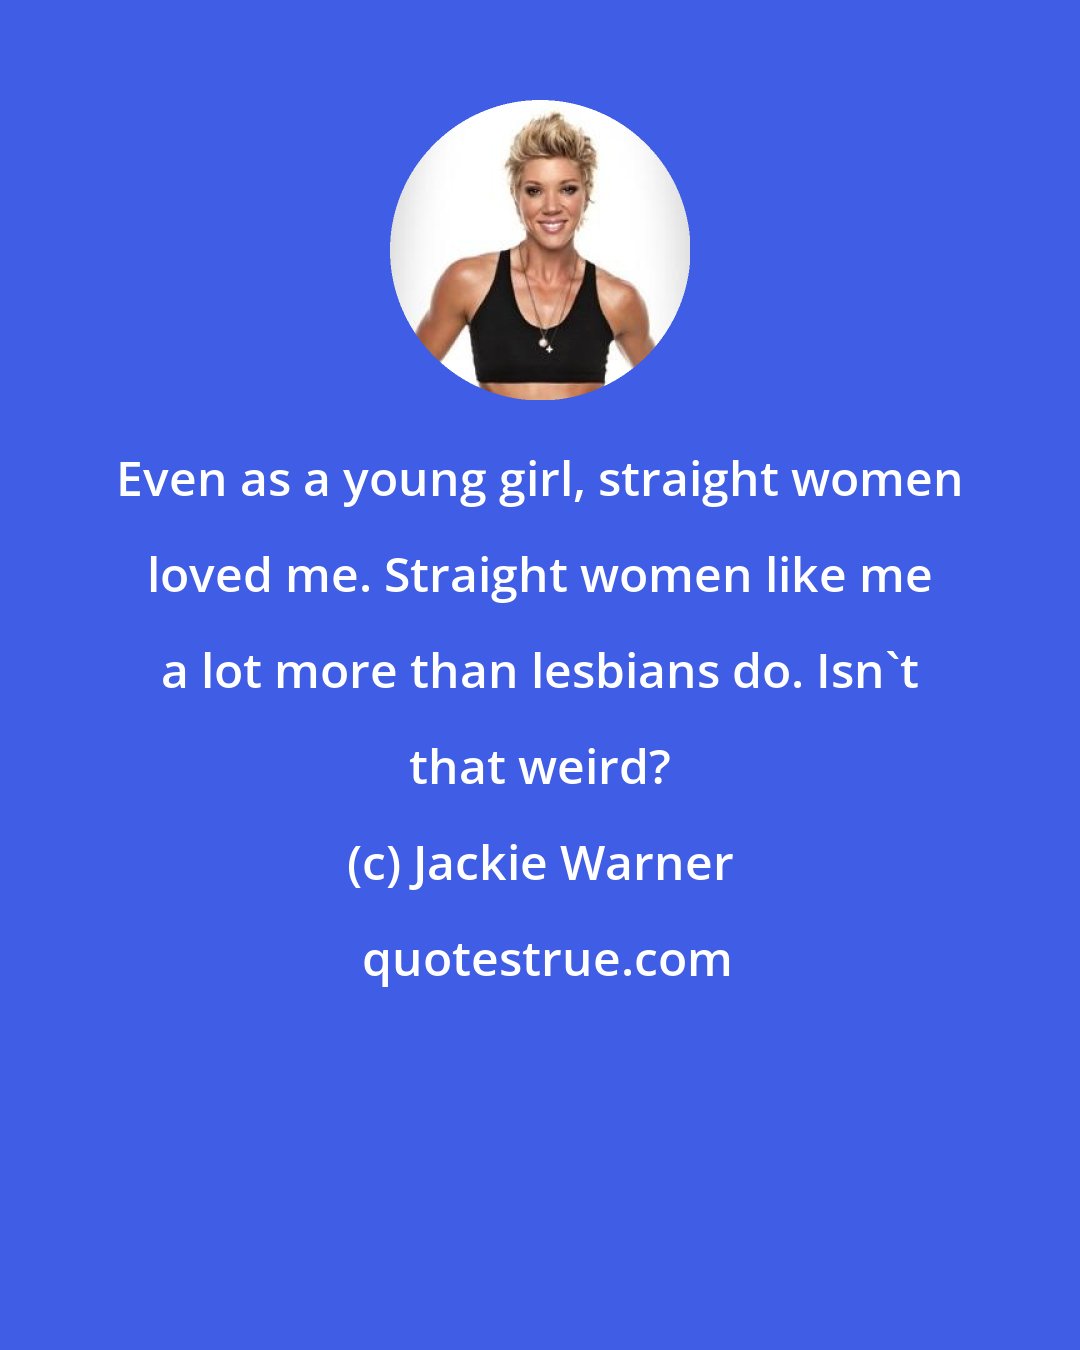 Jackie Warner: Even as a young girl, straight women loved me. Straight women like me a lot more than lesbians do. Isn't that weird?